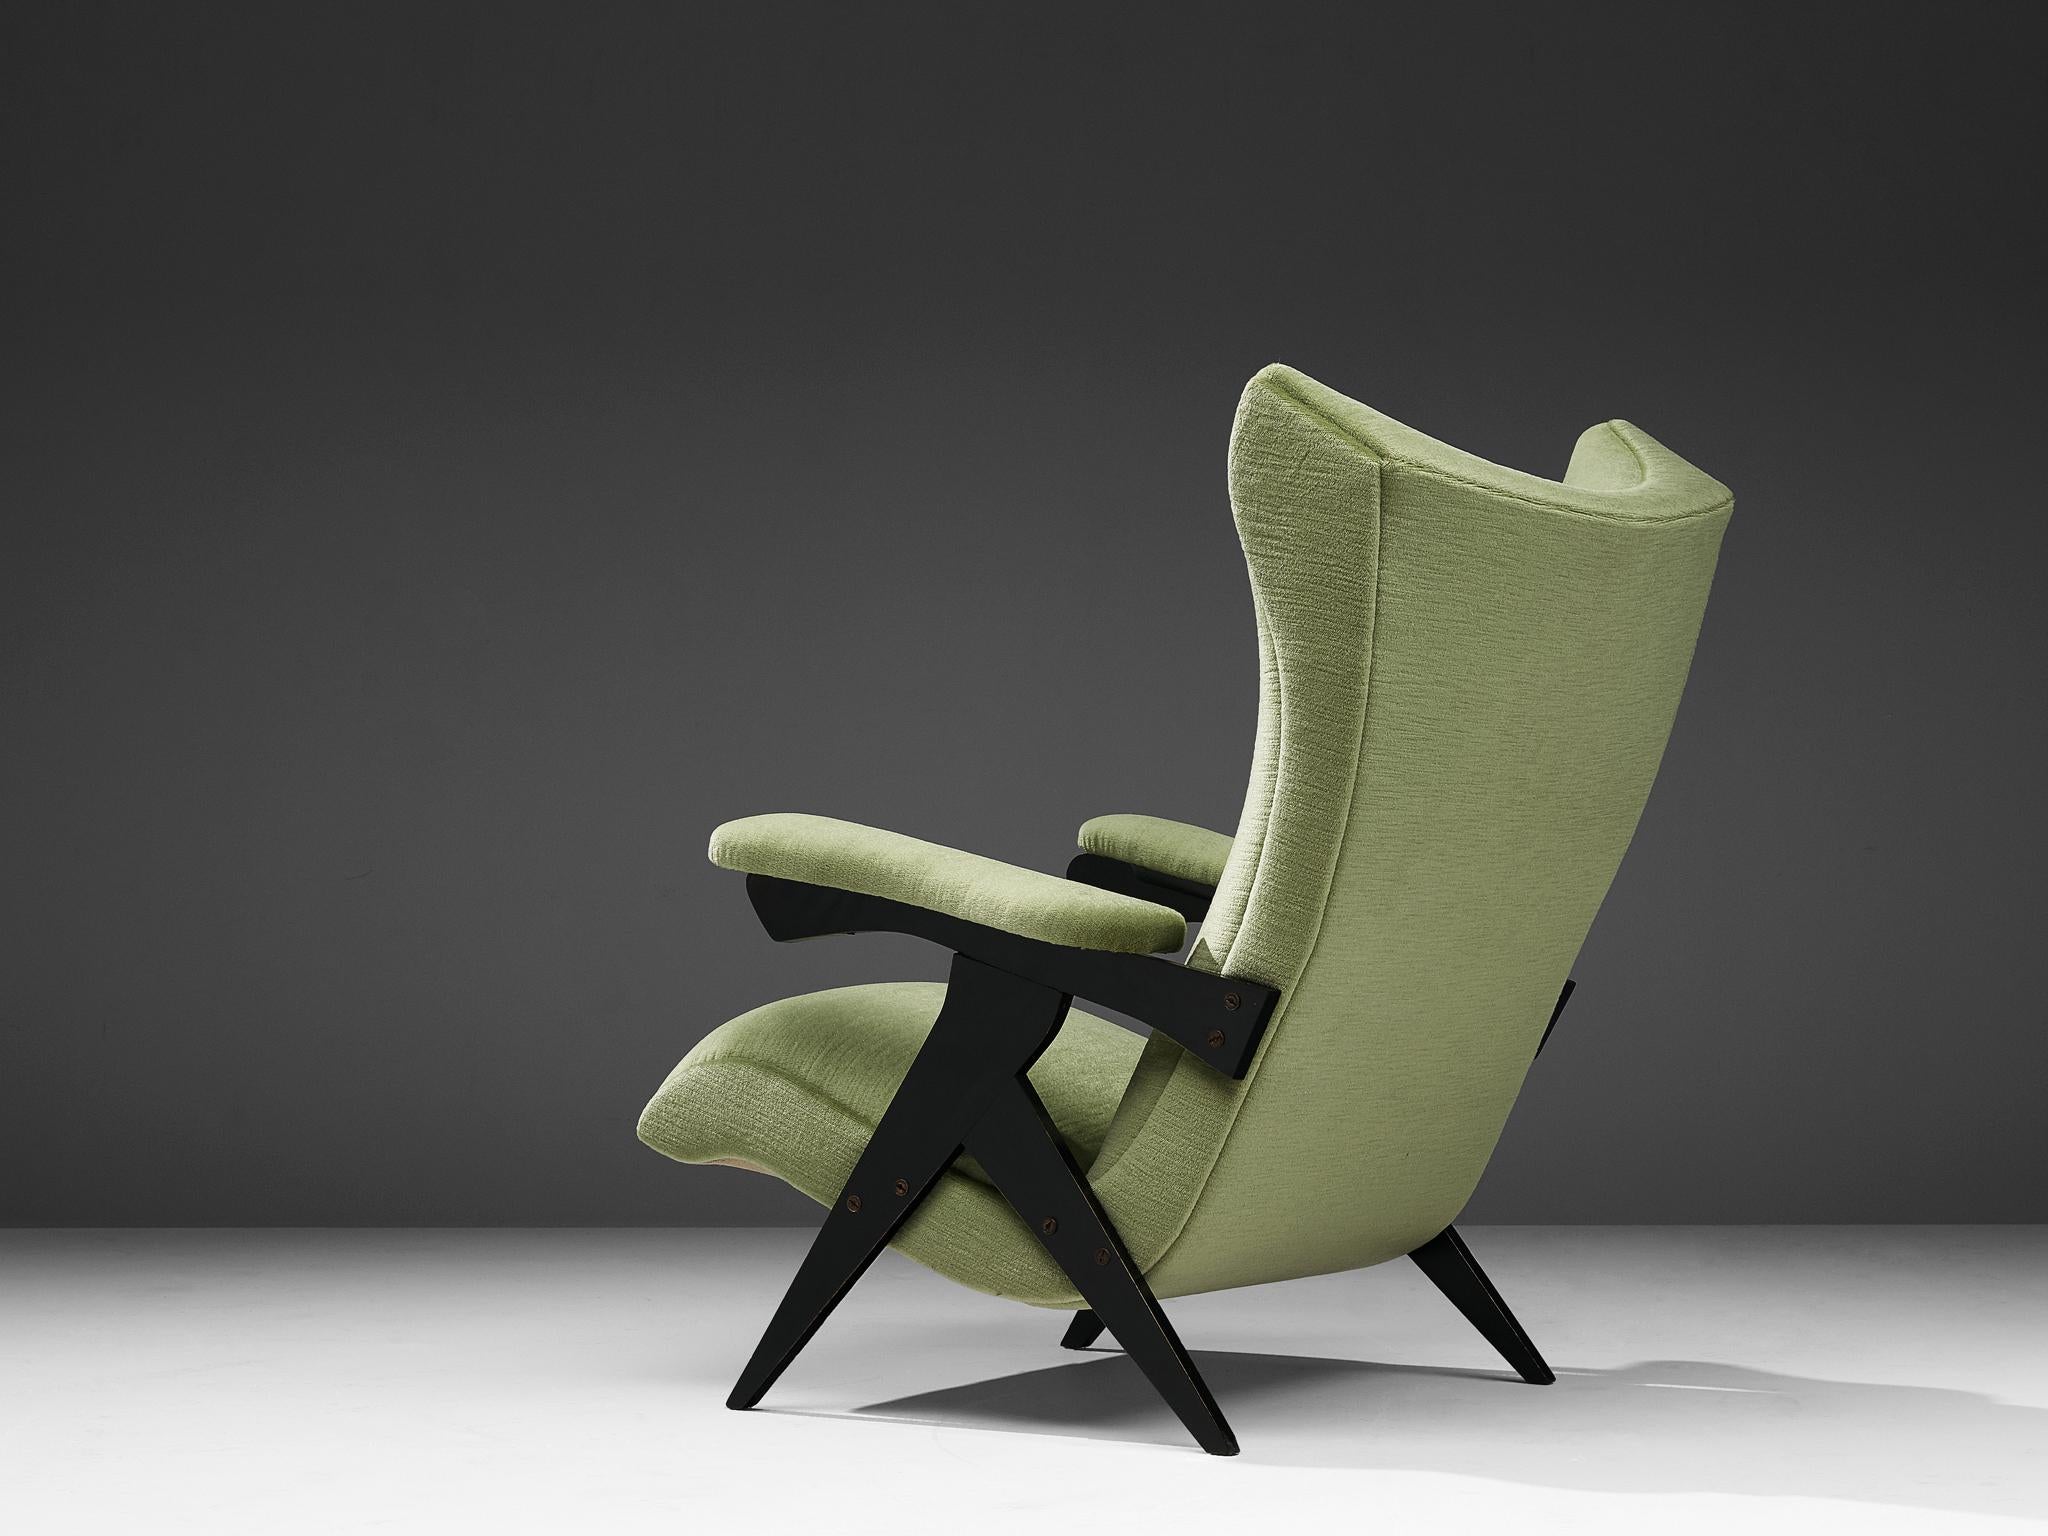 José Zanine Caldas for Móveis Artísticos Z factory, high back lounge chair, reupholstered in green mohair, lacquered wood, Brazil, circa 1950 

This armchair is designed by the esteemed Brazilian designer José Zanine Caldas for Móveis Artísticos Z